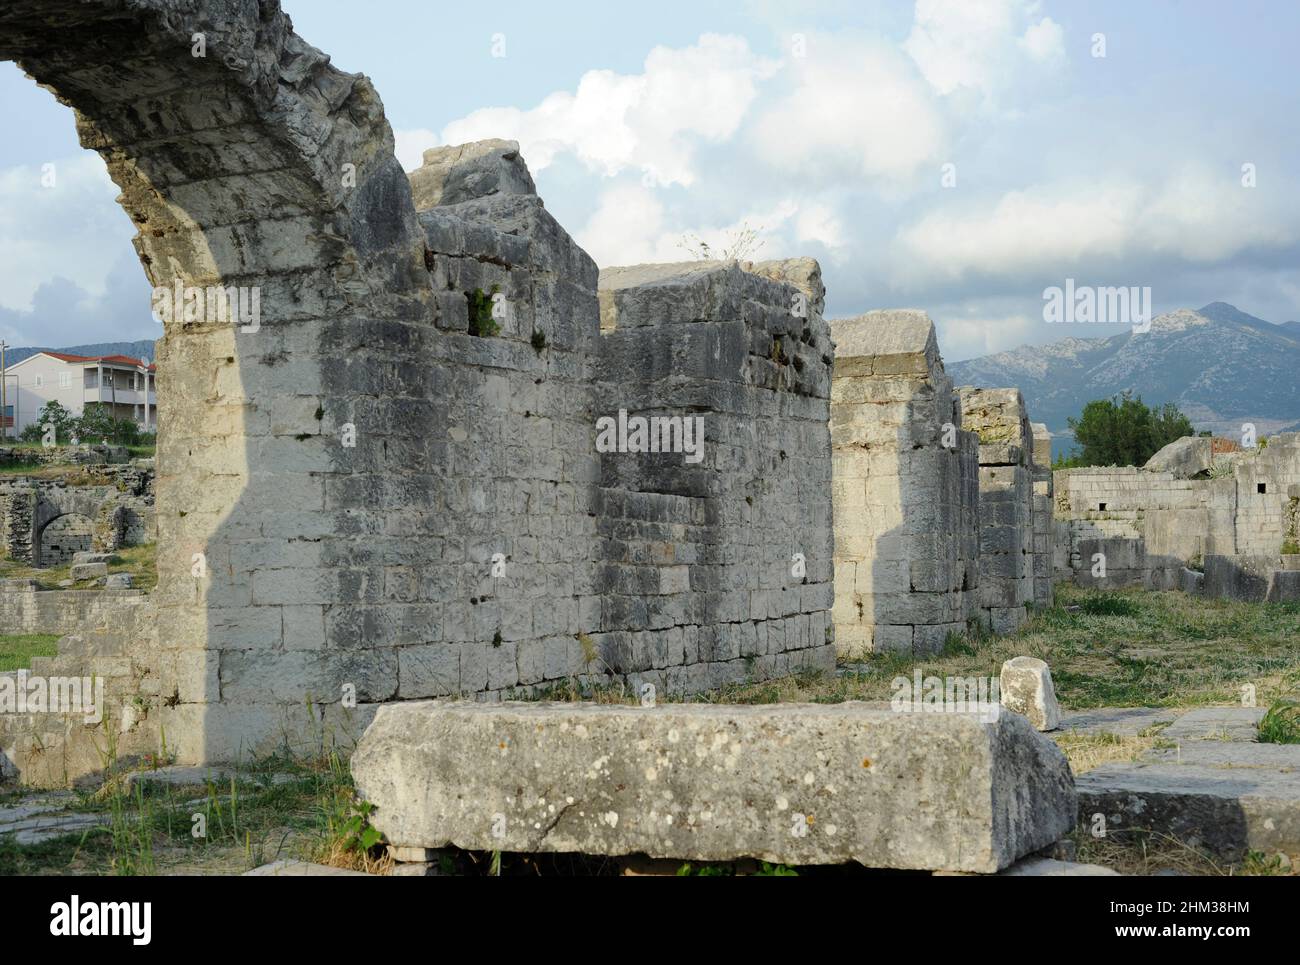 Croatia, Solin. Ancient city of Salona. Colonia Martia Ivlia Valeria. It was the capital of the Roman province of Dalmatia. Ruins of the amphitheater, built in the second half of the 2nd century AD. Stock Photo